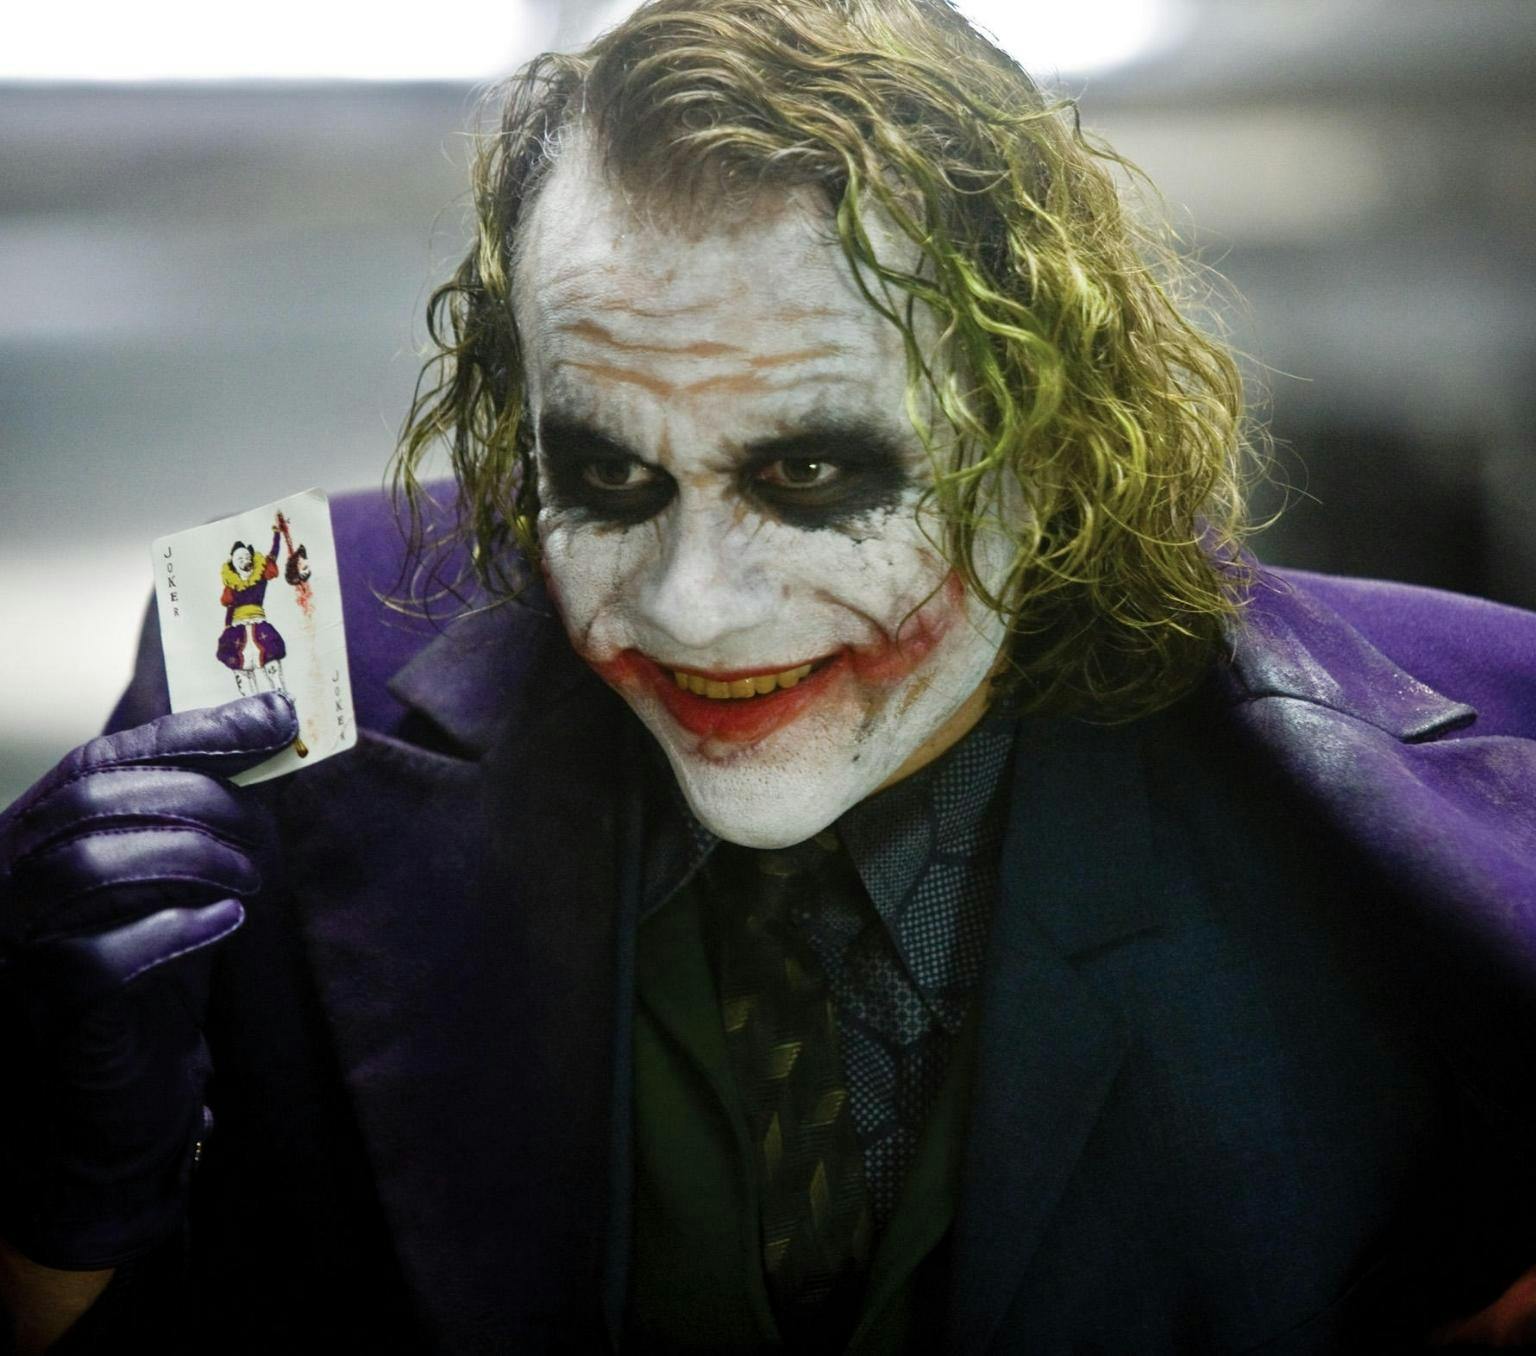 Heath Ledger as the Joker, with yellow hair, white make-up on his face, and red lipstick smudged on this lips and across this cheeks. He wears a purple jacket and gloves and holds up a playing card featuring the joker.